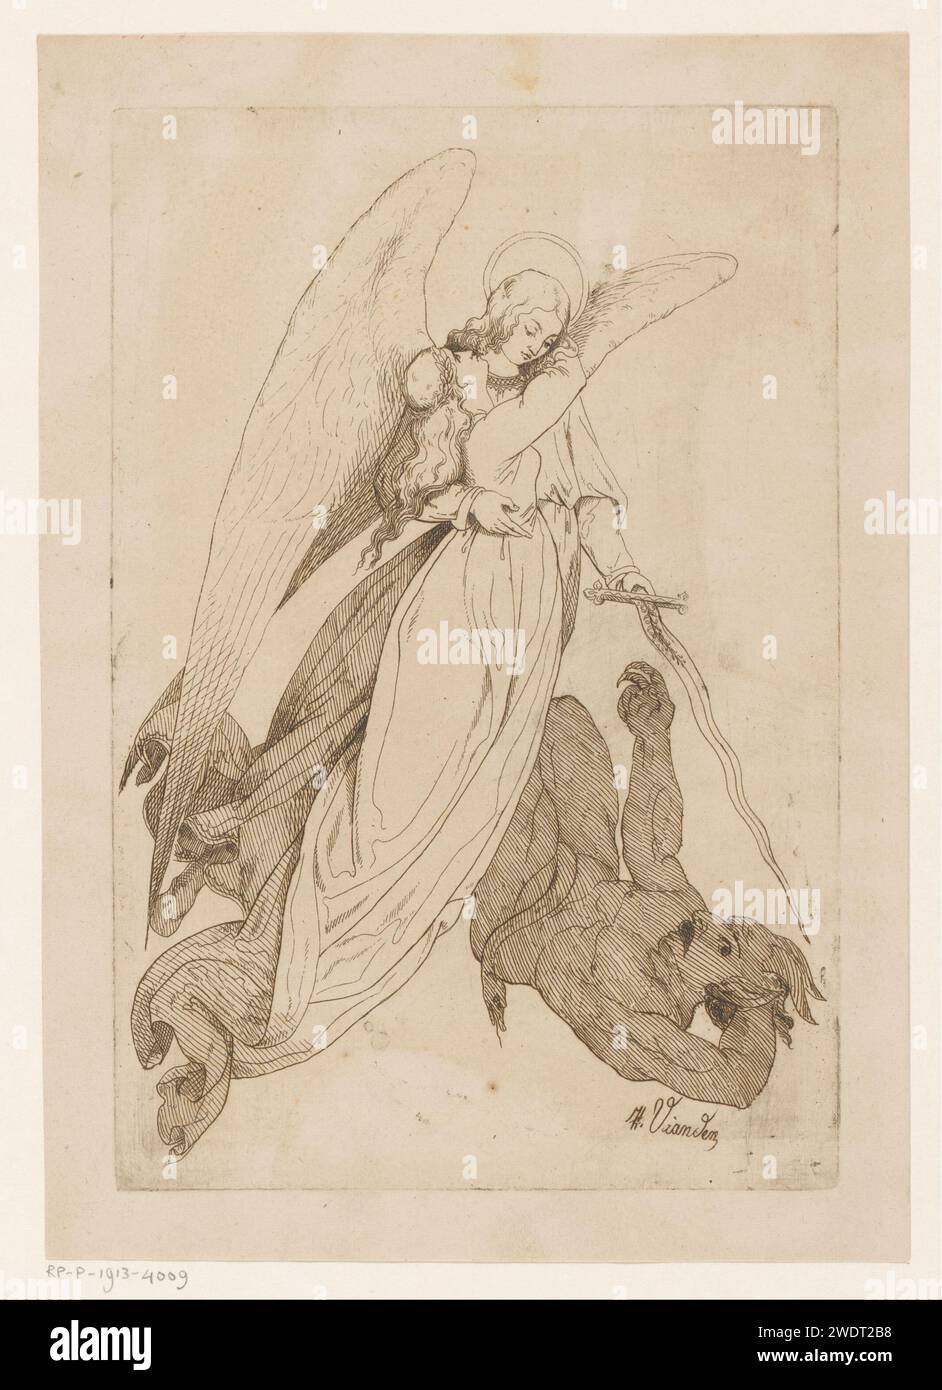 Engel lifts a female holy and beats a demon, Heinrich Vianden, 1836 print  Germany (possibly) paper etching angels fighting against other evil powers. devil(s) and demons. gripping someone by other parts of the body Stock Photo